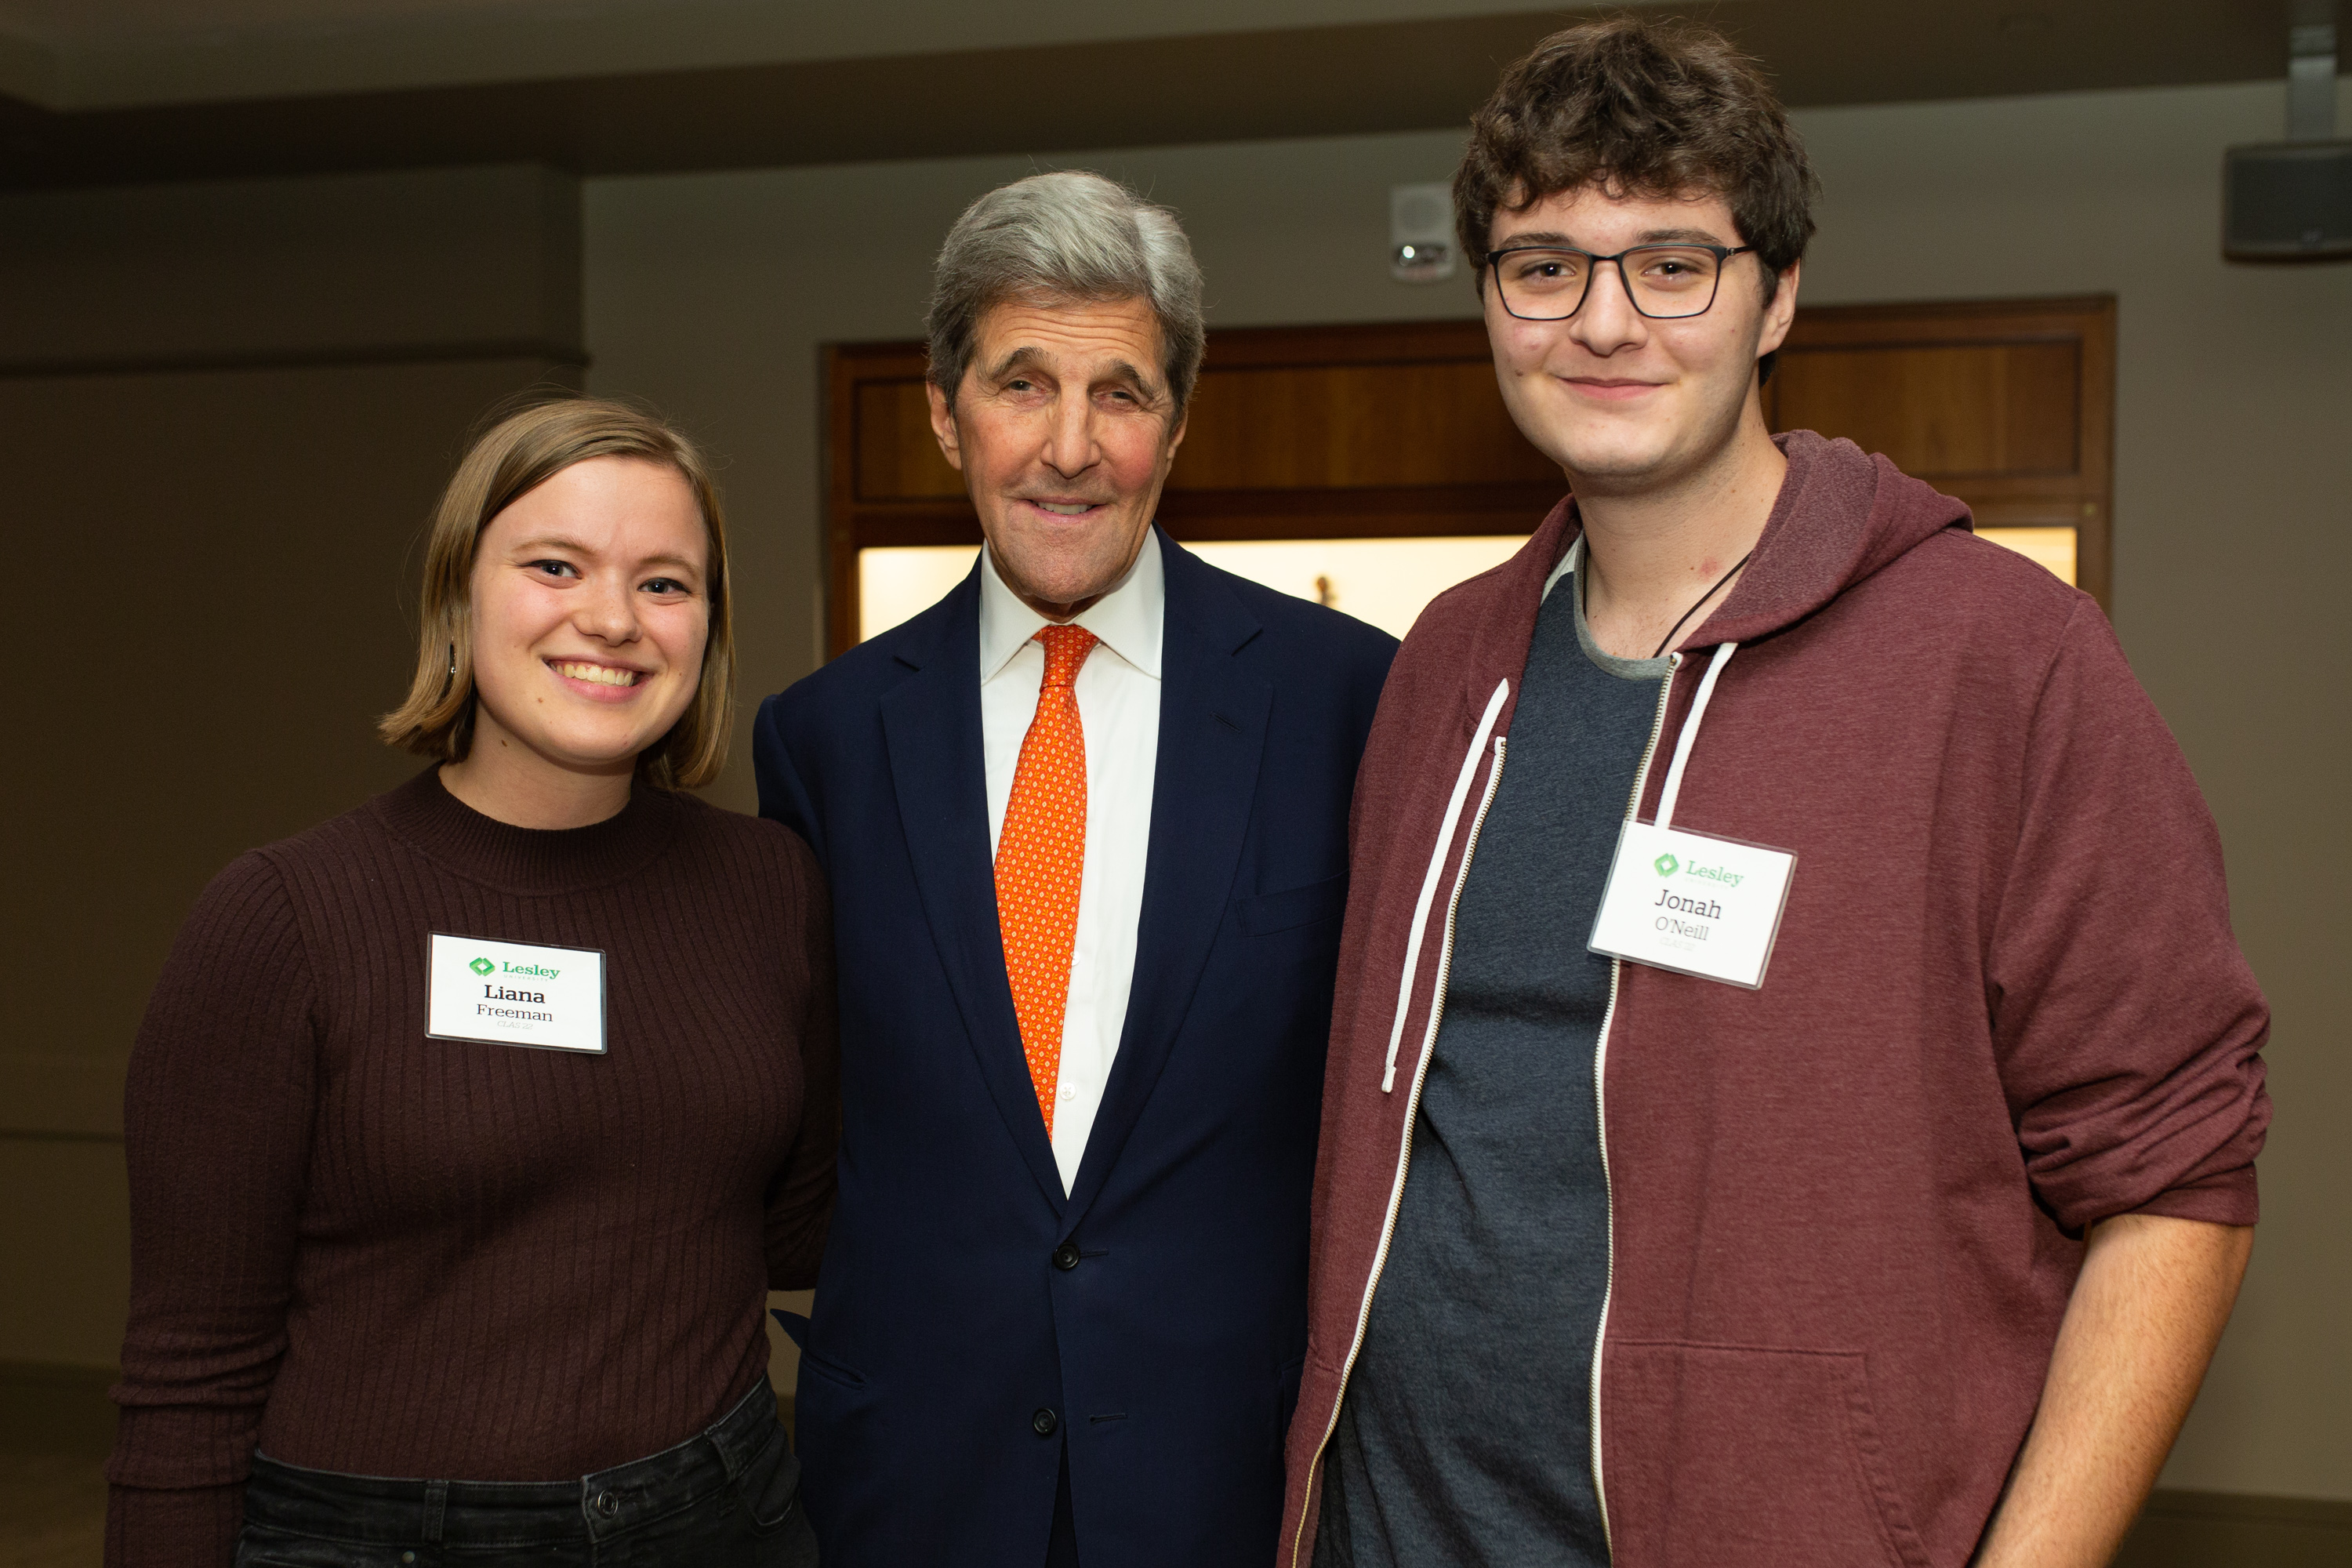 Students Liana Freeman and Jonah O’Neill stand on either side of John Kerry posing for a photo